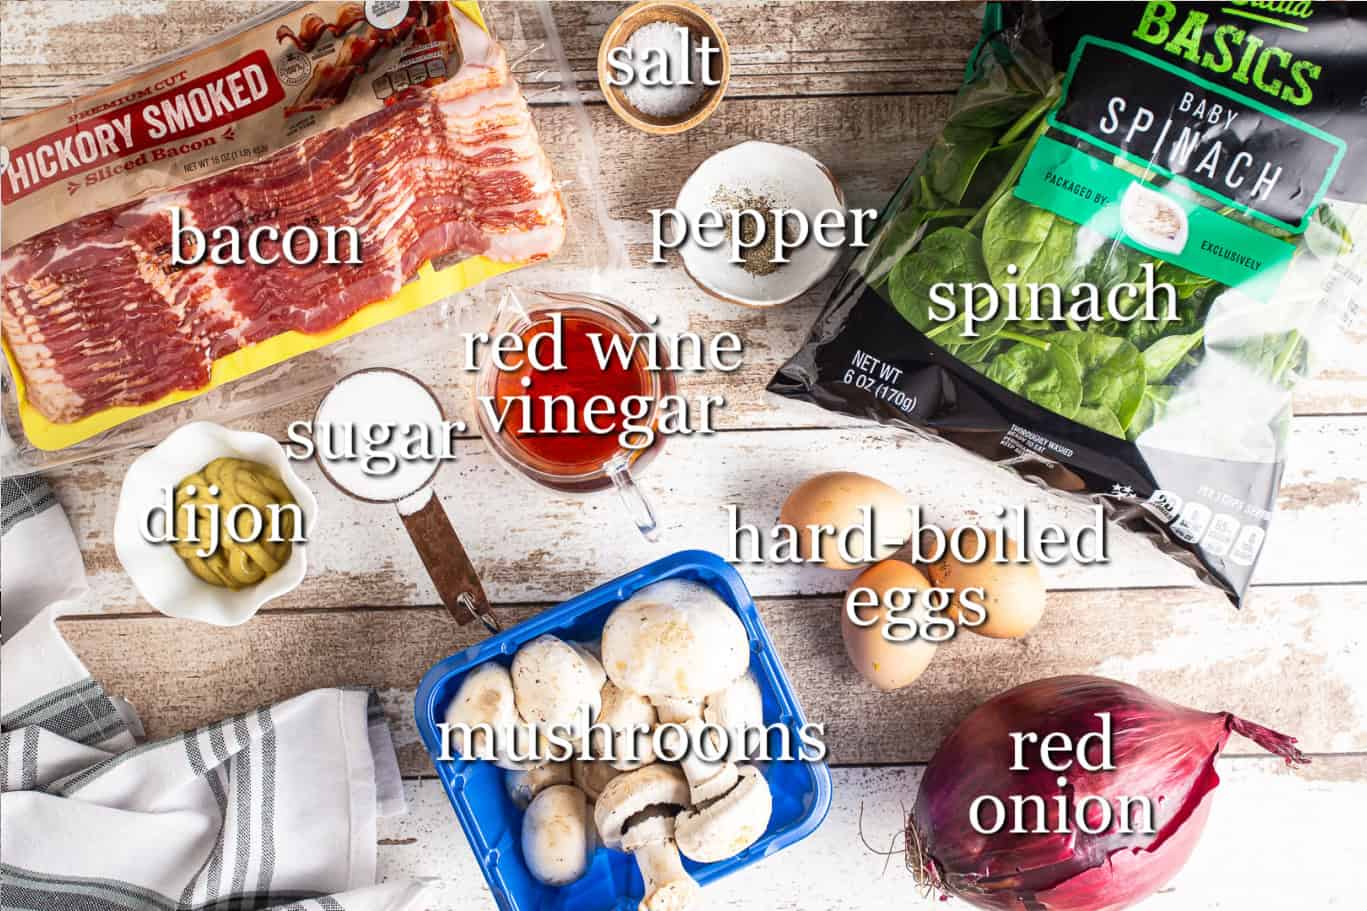 Ingredients for making spinach salad with warm bacon dressing, with text labels.